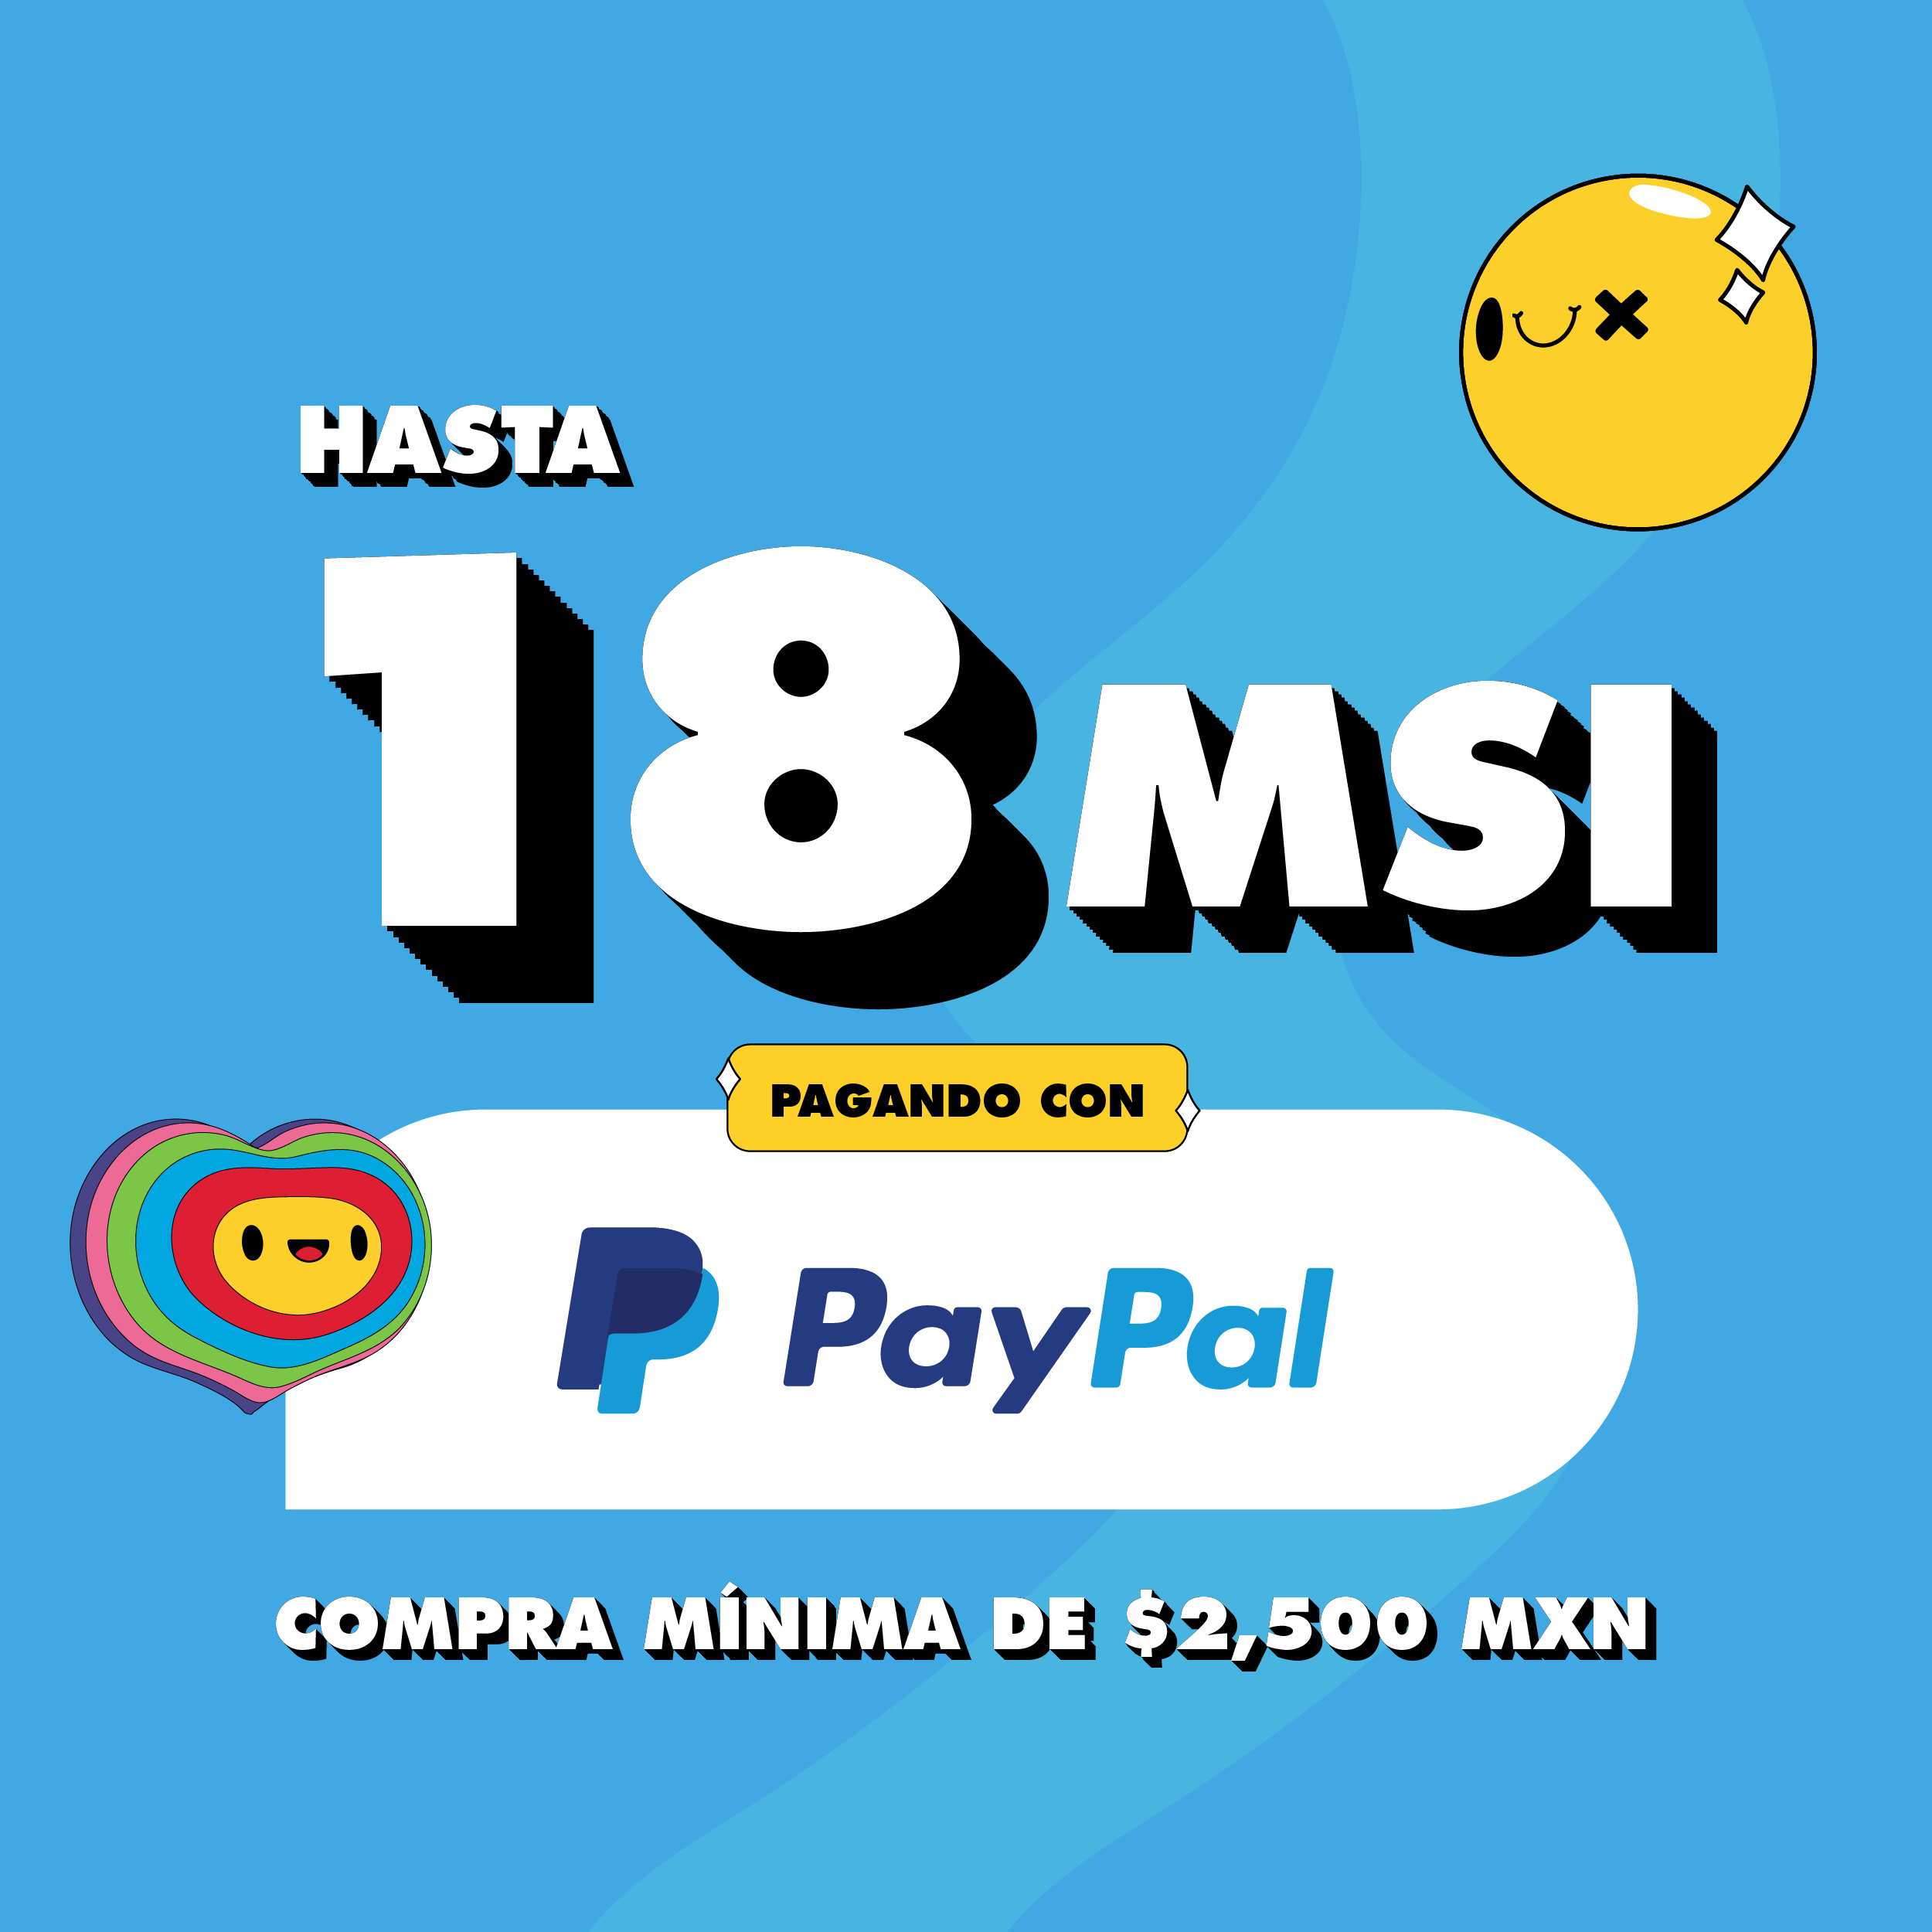 banners_PAYPAL.png__PID:40d29cd7-580e-4e11-aad6-8f5d73fce903